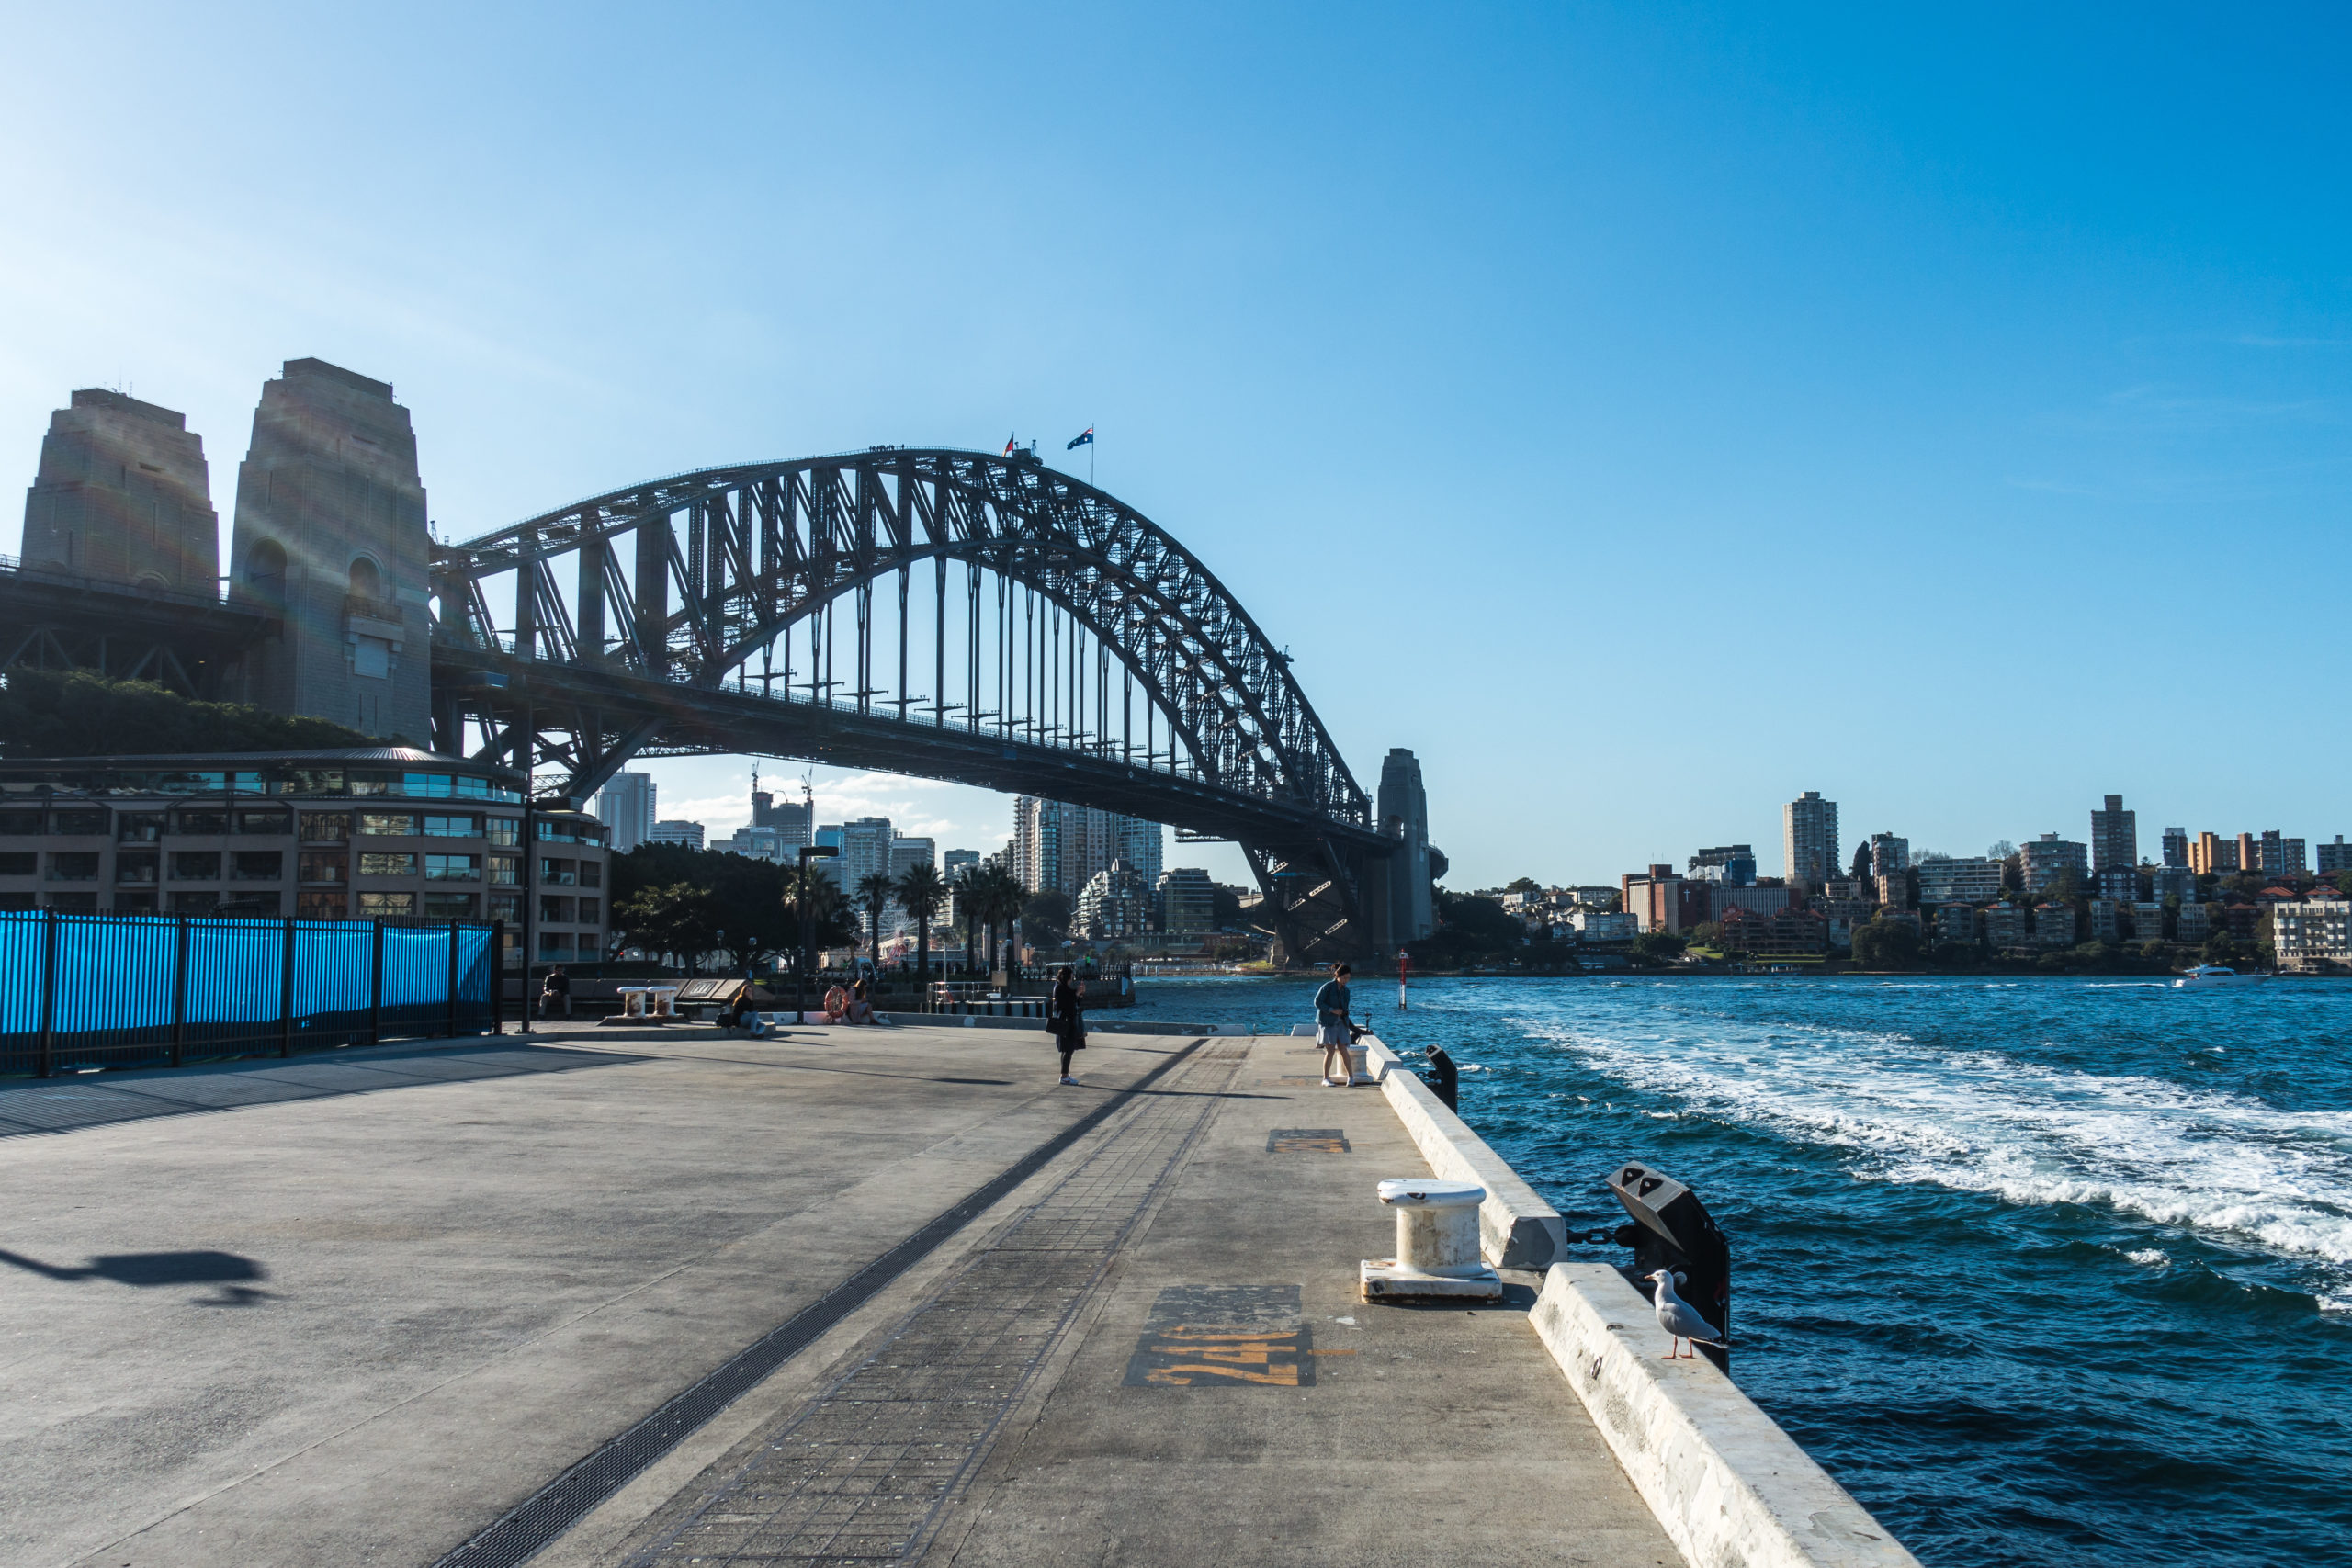 tourist guide to sydney